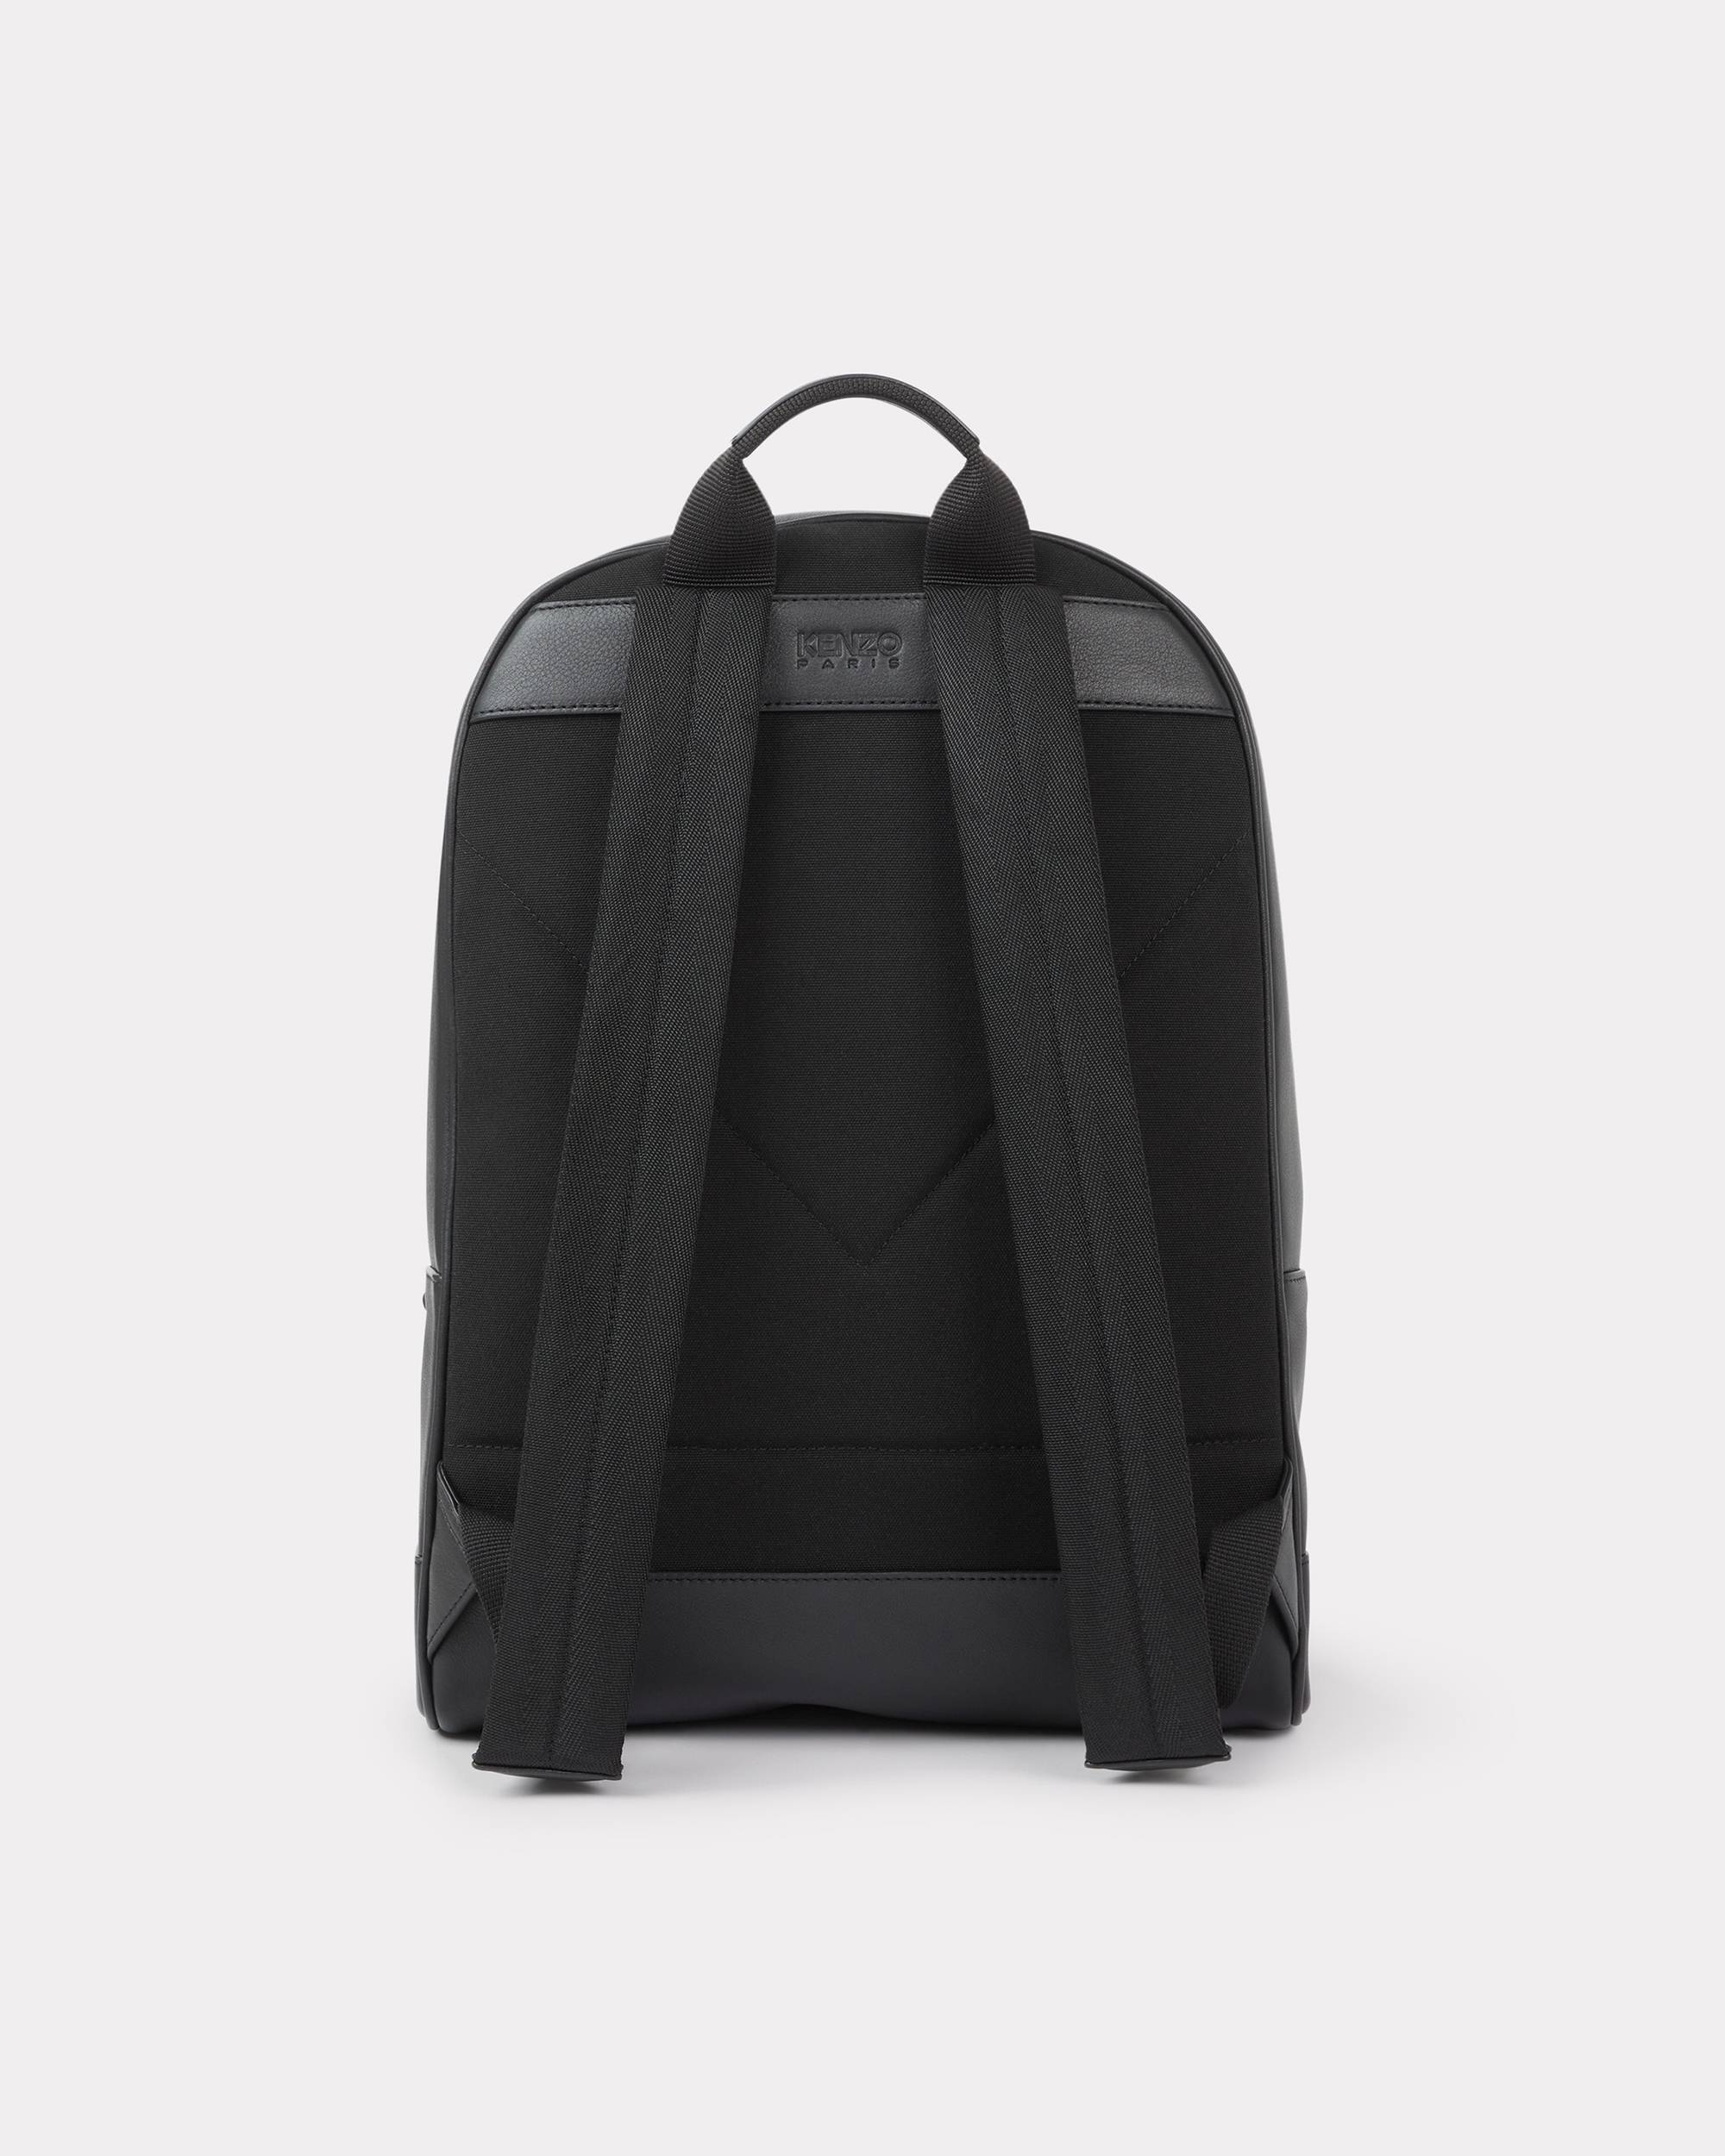 'KENZOGRAPHY' leather backpack - 2